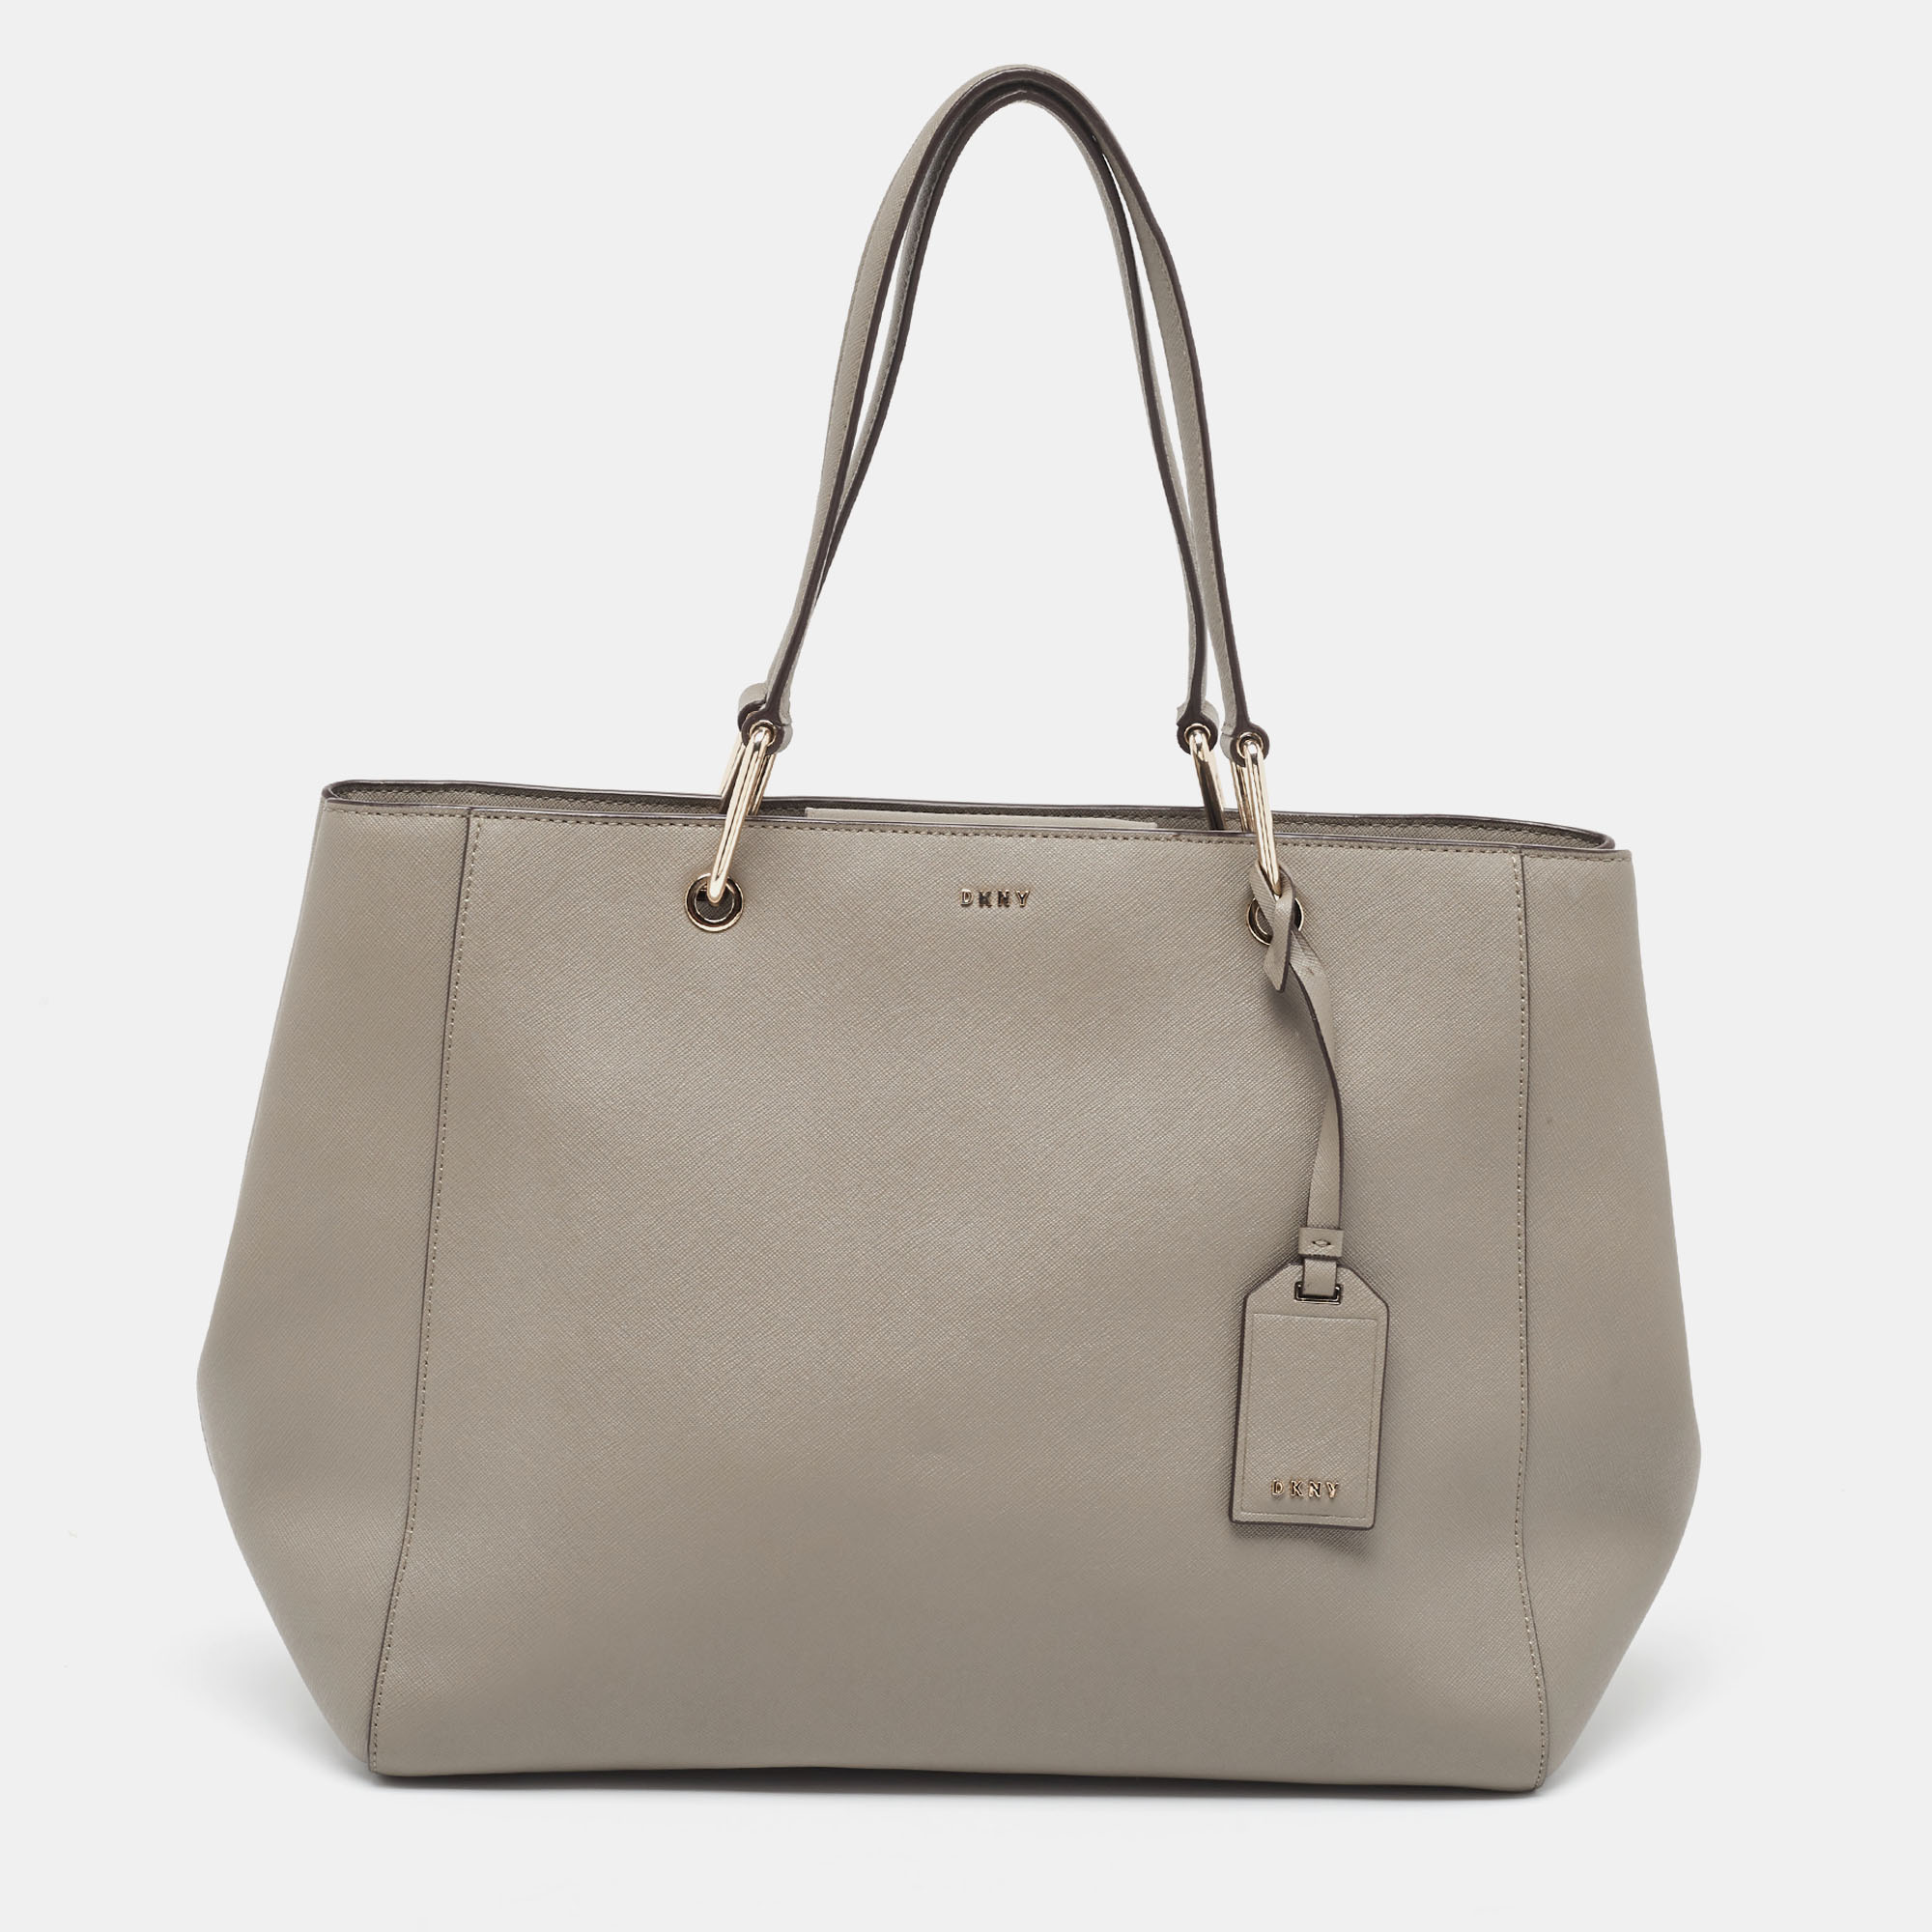 DKNY Grey Leather Bryant Park Tote